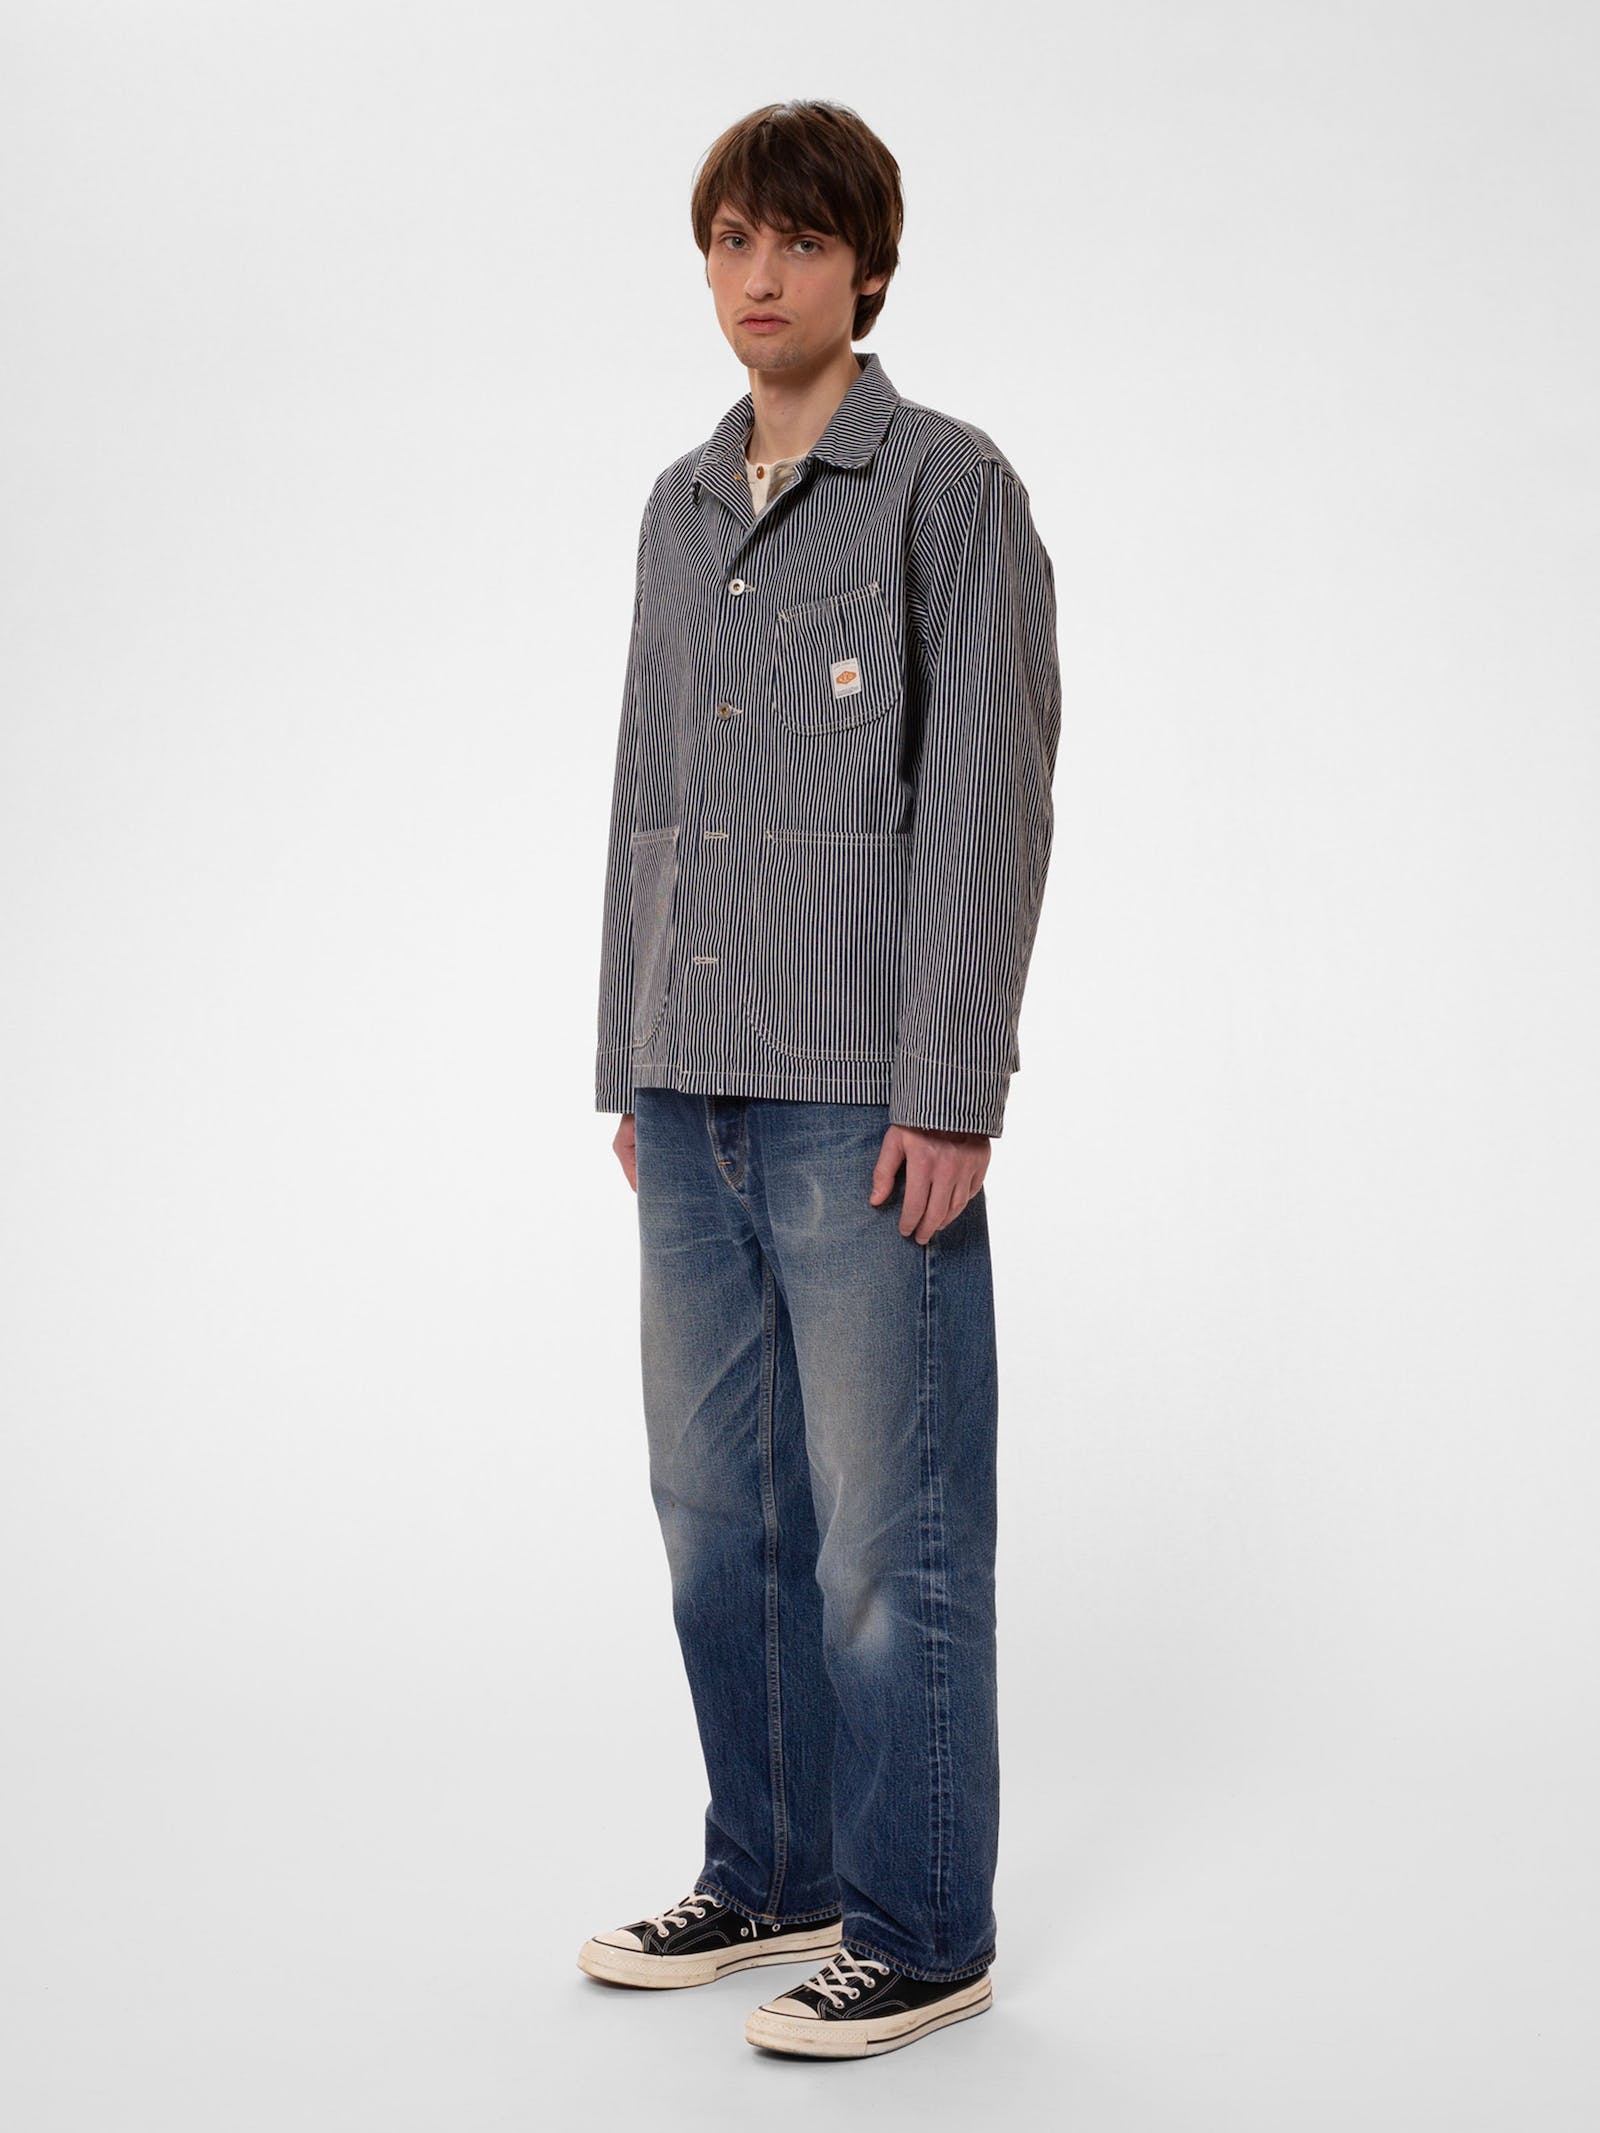 Nudie - Howie Hickory Chore Jacket - Blue/Offwhite